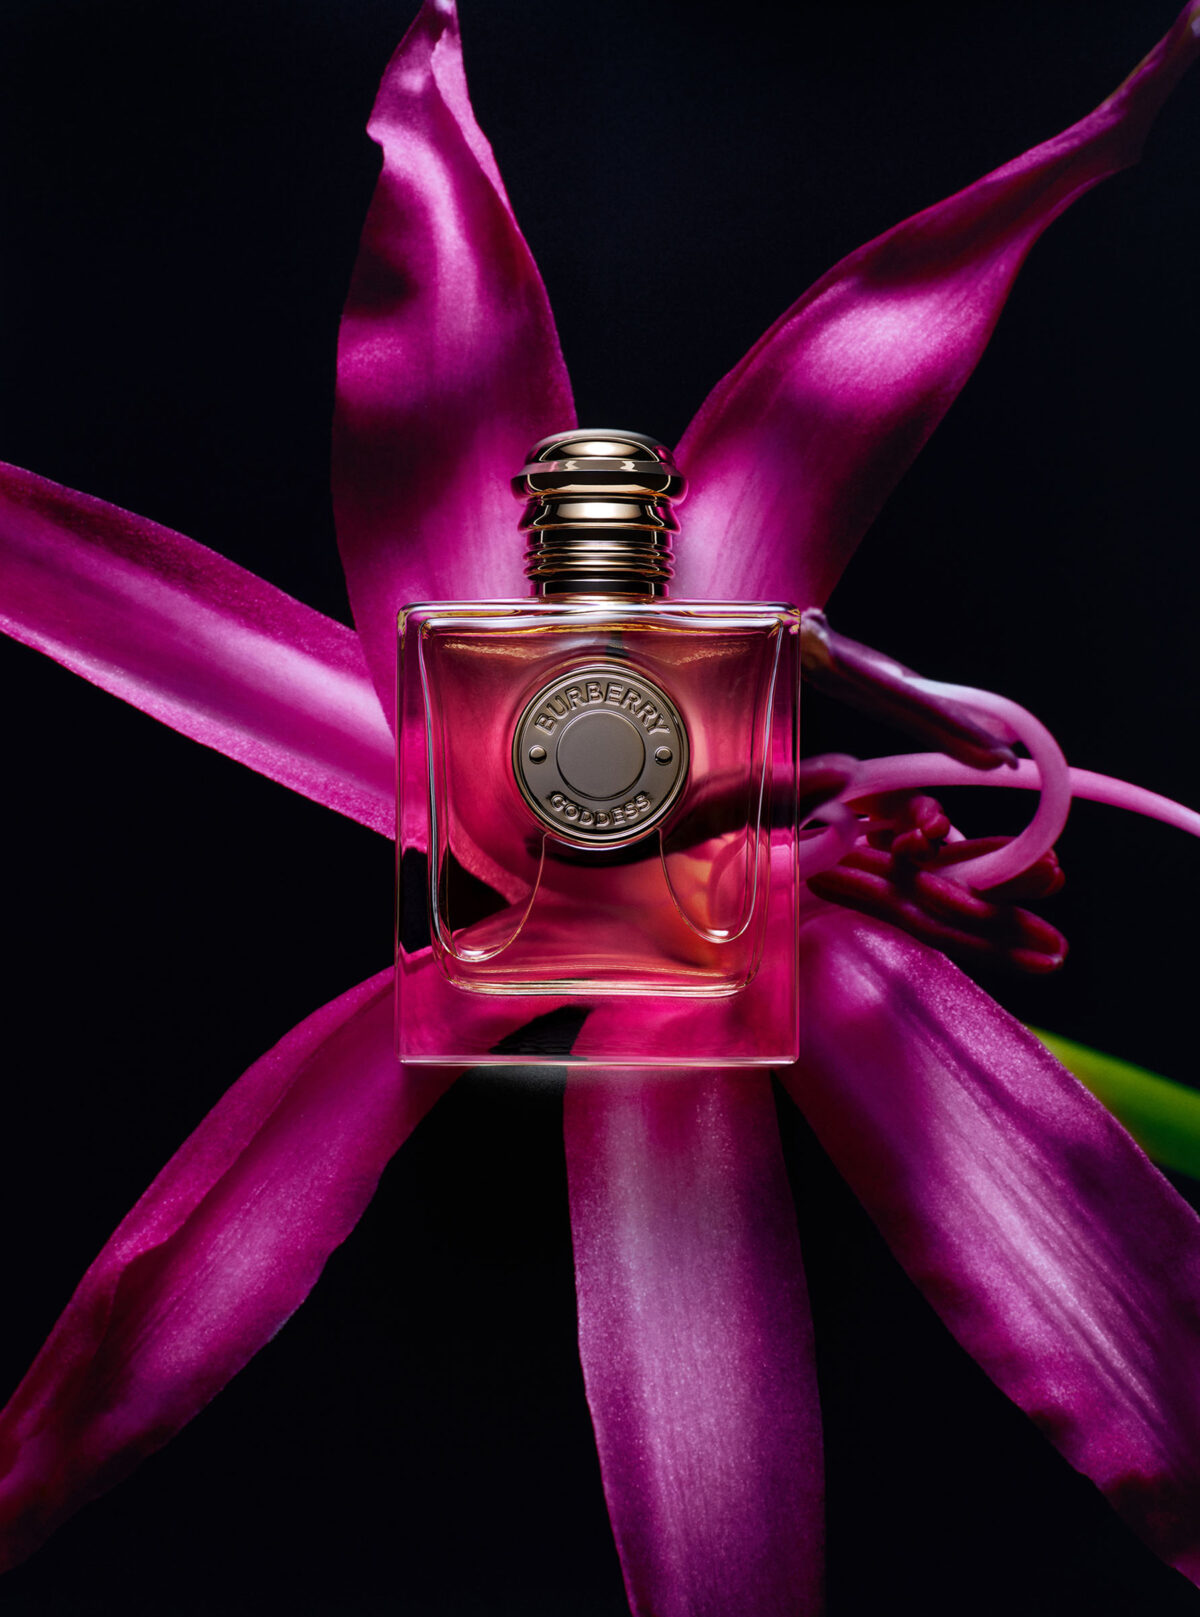 Burberry, beauty, beauty product, fragrance, Narcisse, perfume, scent, productphotography, stilllife, photography, klas foerster